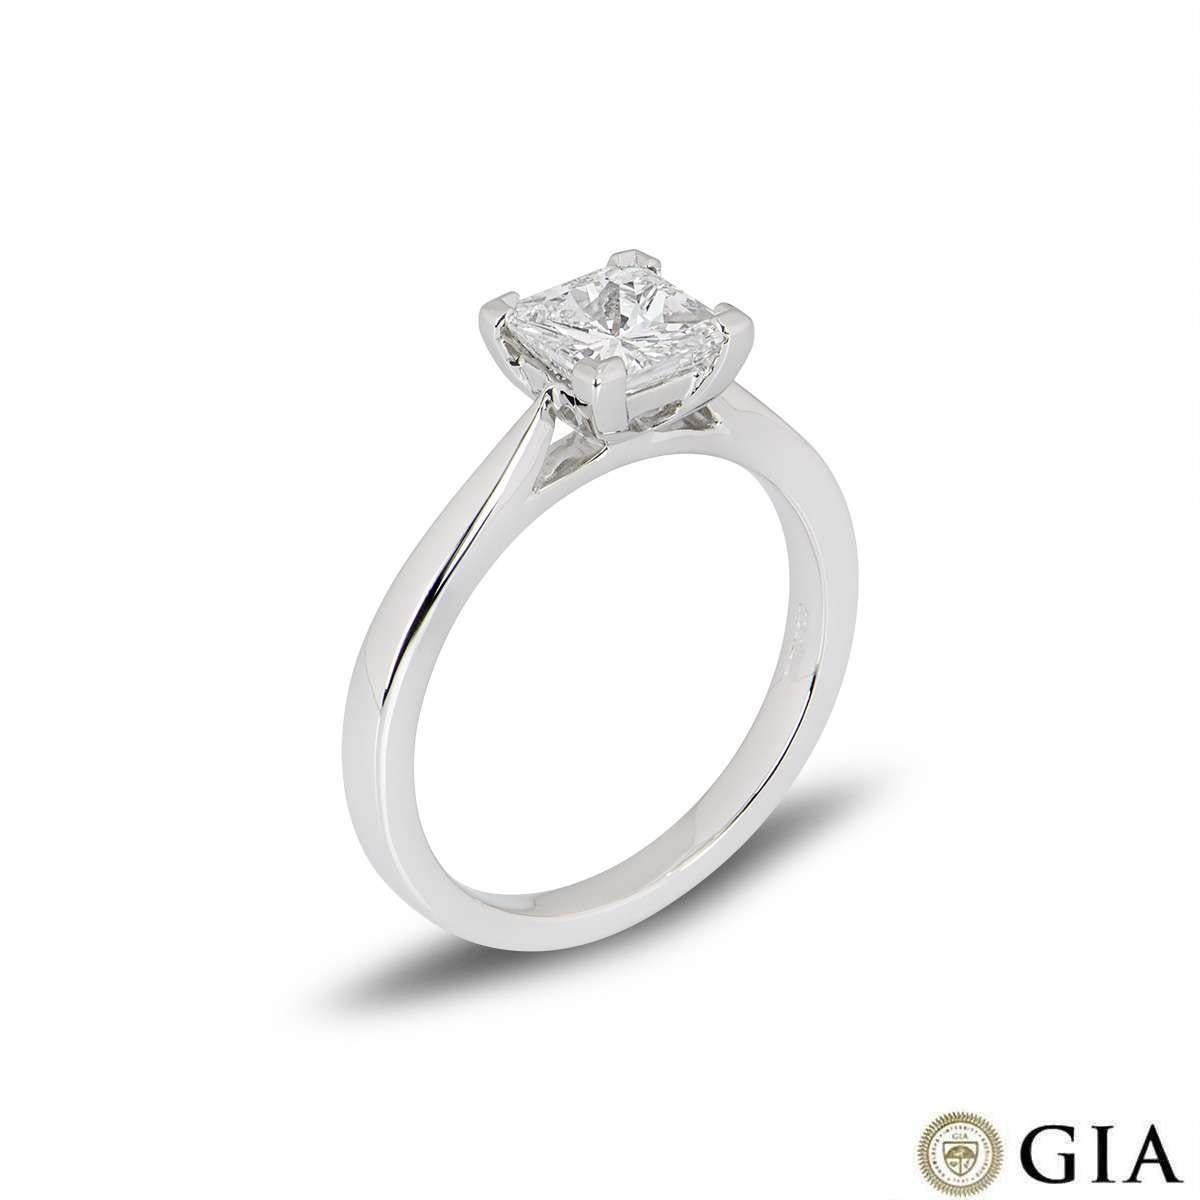 A gorgeous platinum diamond ring. The ring is set with a radiant cut diamond weighing 1.03ct, F colour and VS1 in clarity set within a classic four claw mount. The ring is currently a size UK M - EU 52 but can be adjusted for a perfect fit and has a